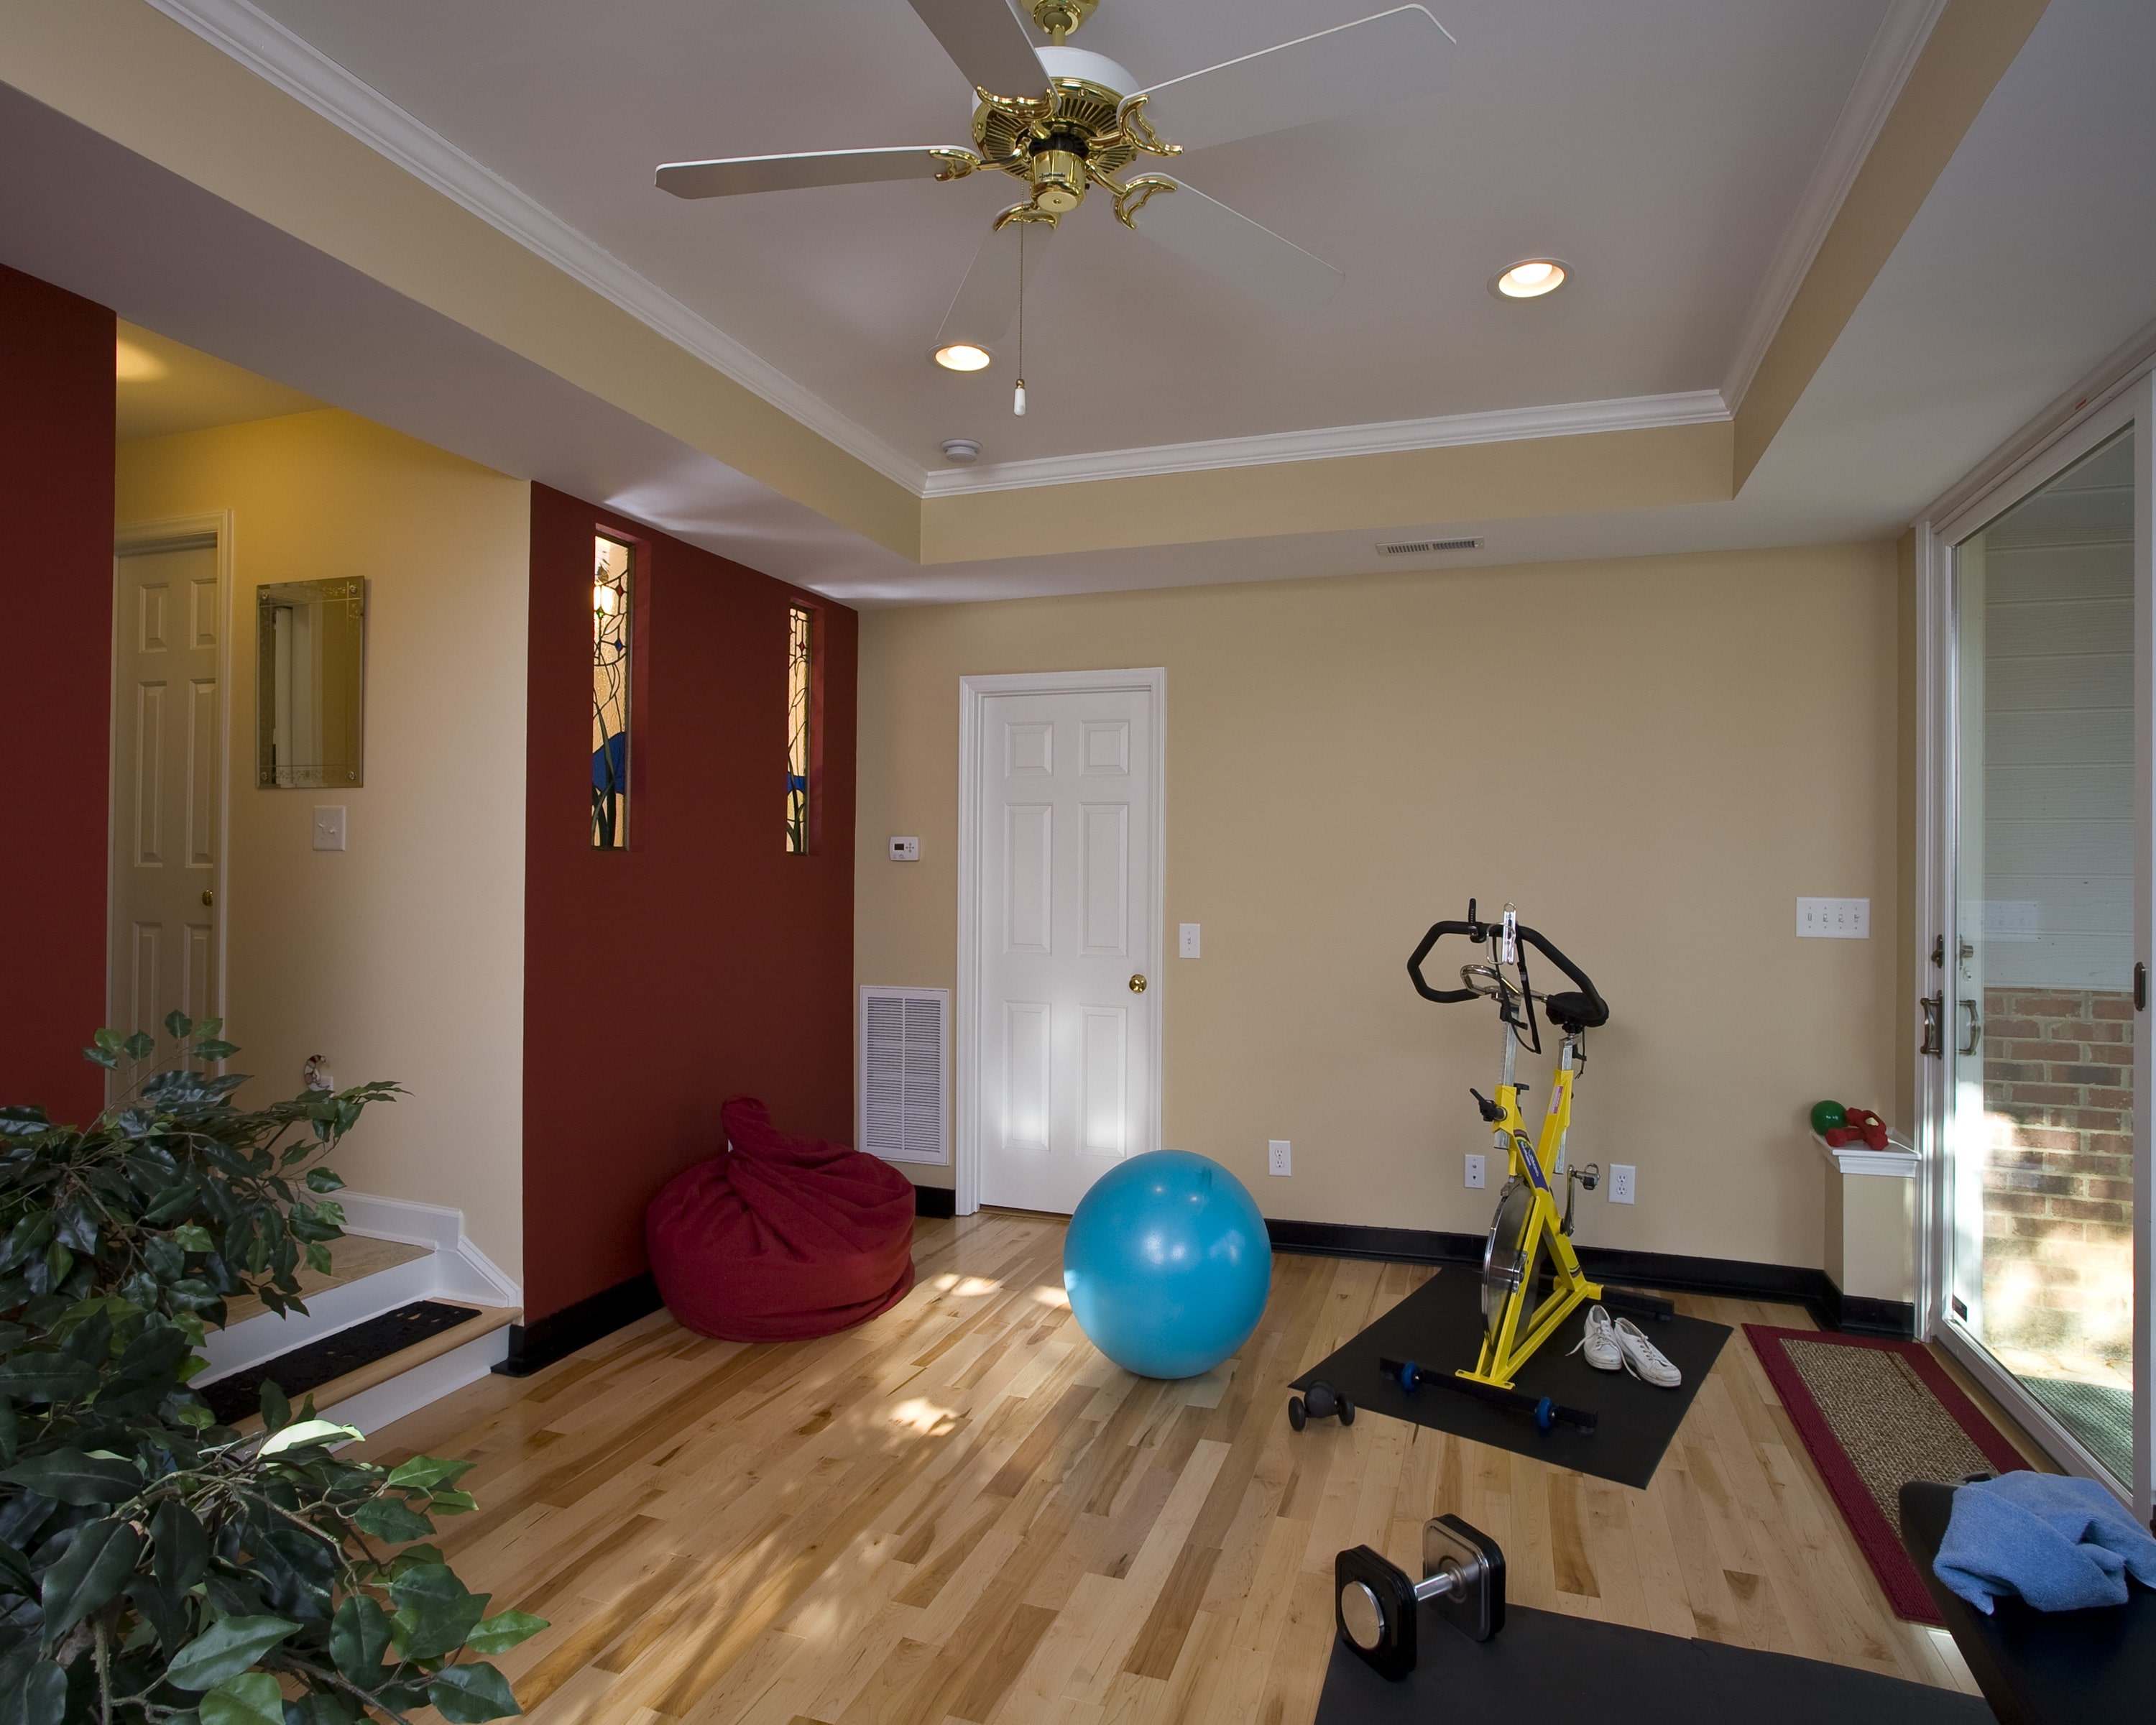 Exercise Room in New Basement Area